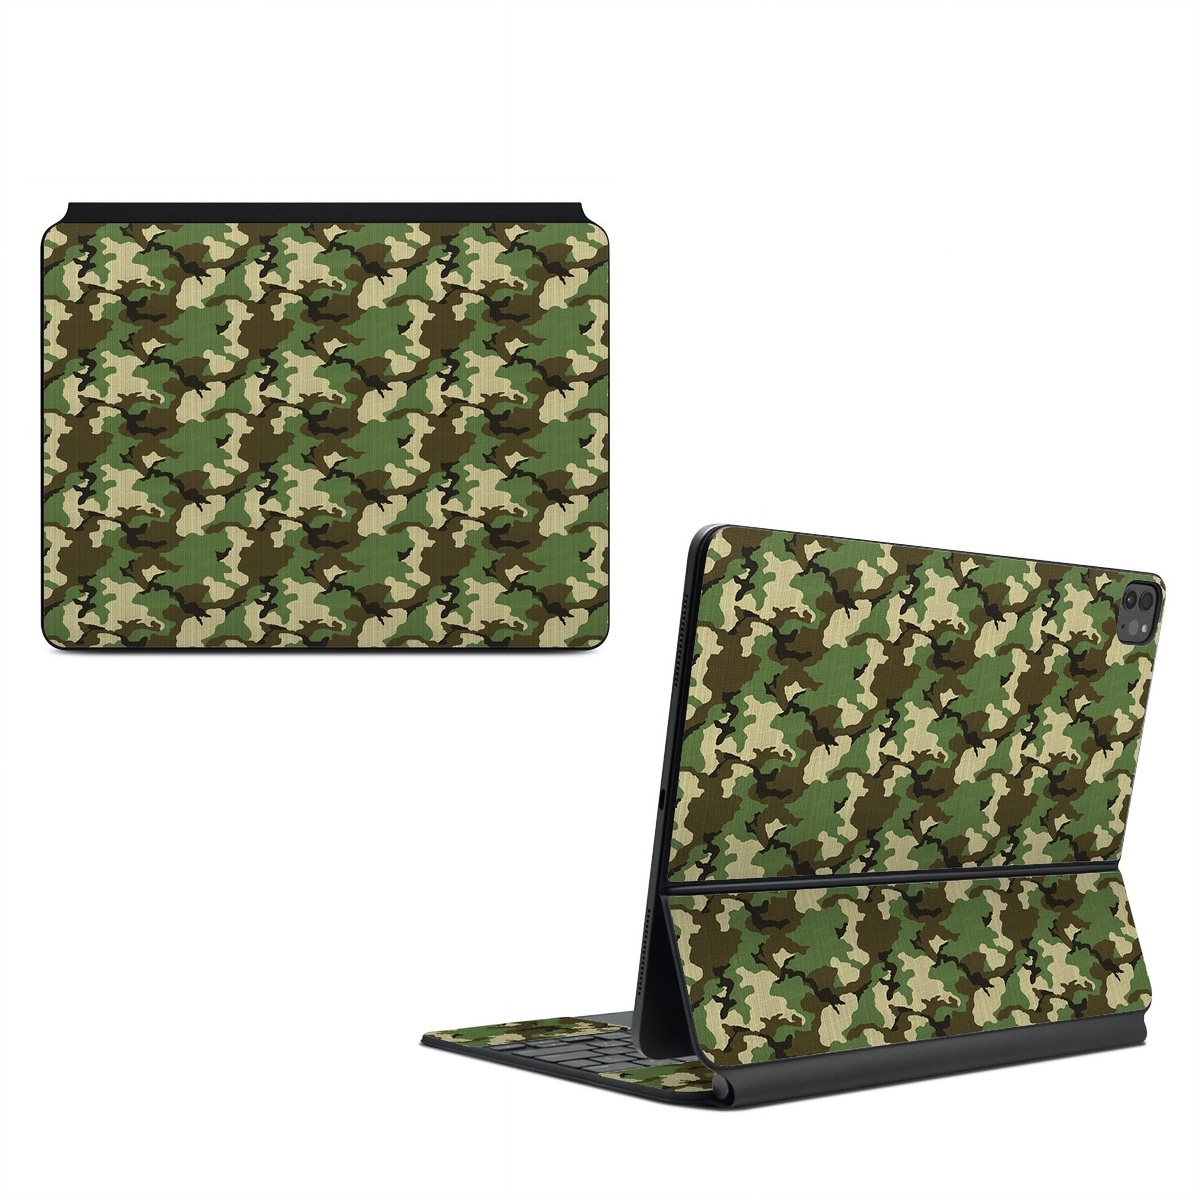 Magic Keyboard for iPad Series Skin design of Military camouflage, Camouflage, Clothing, Pattern, Green, Uniform, Military uniform, Design, Sportswear, Plane, with black, gray, green colors